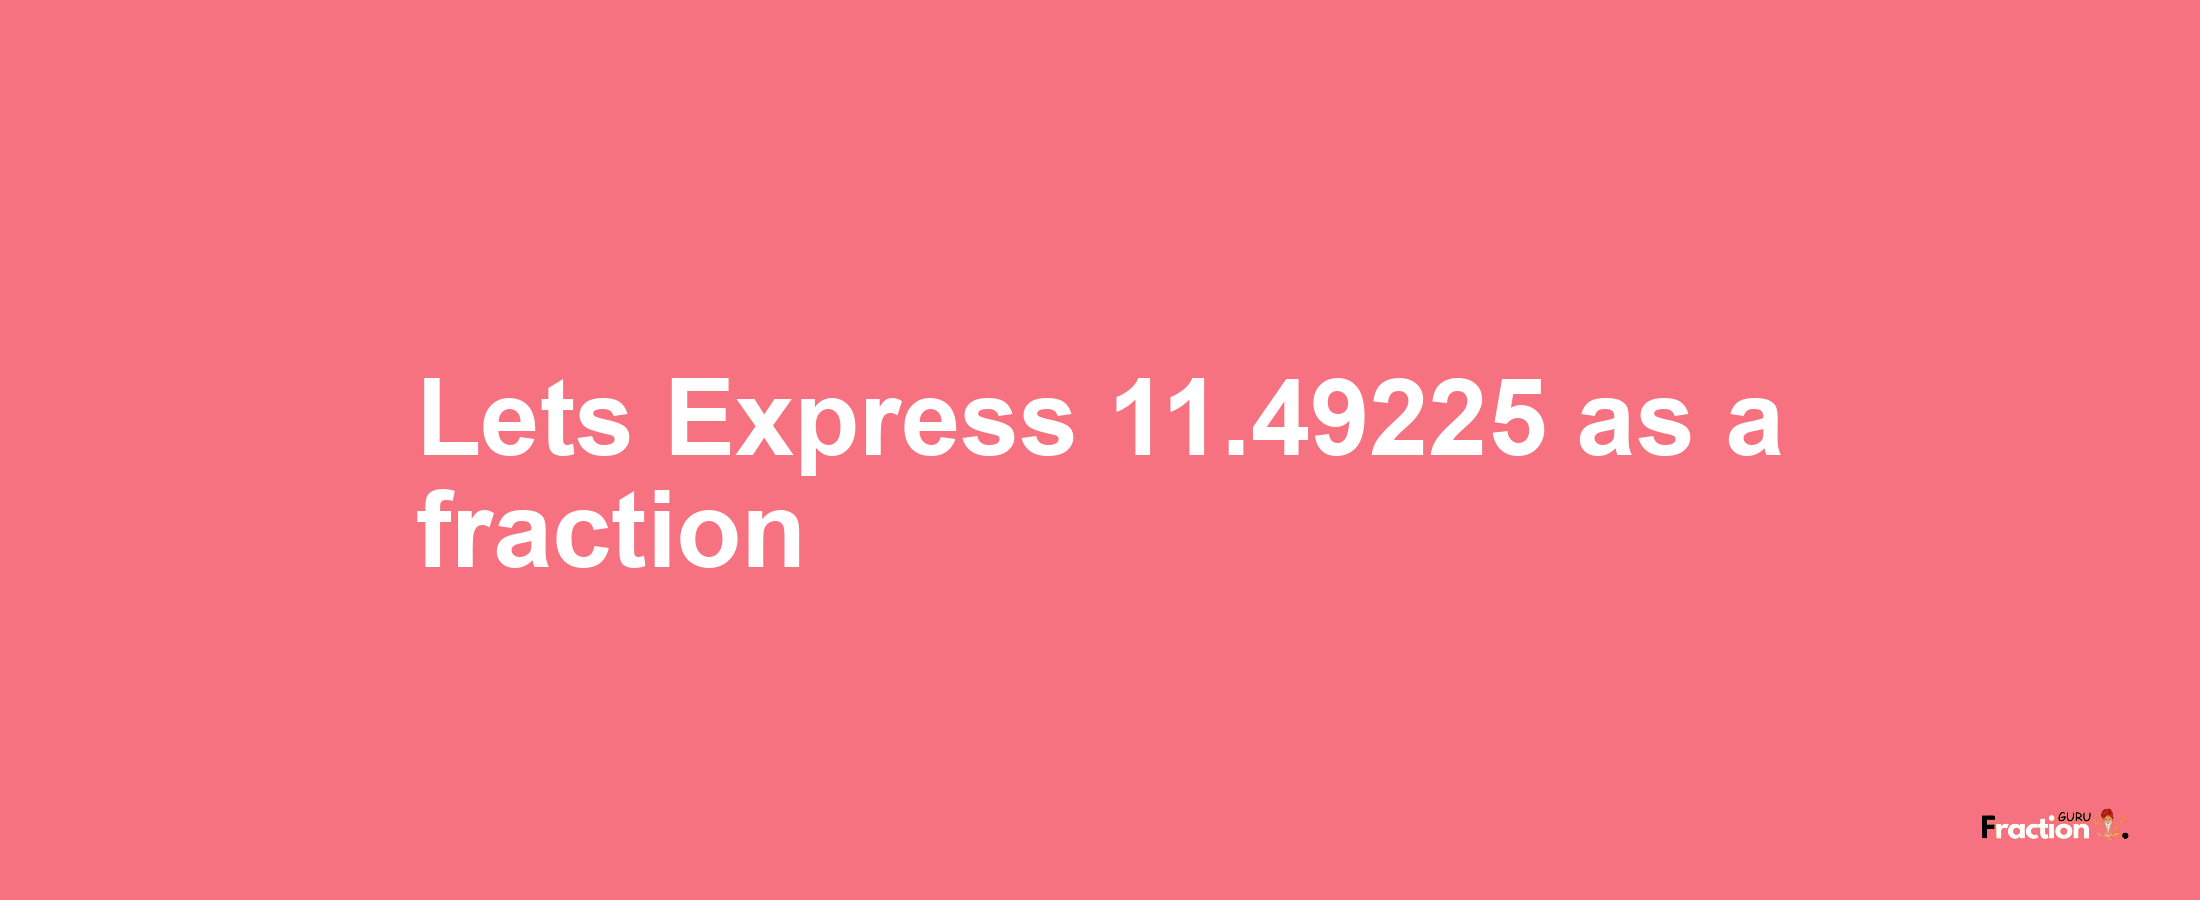 Lets Express 11.49225 as afraction